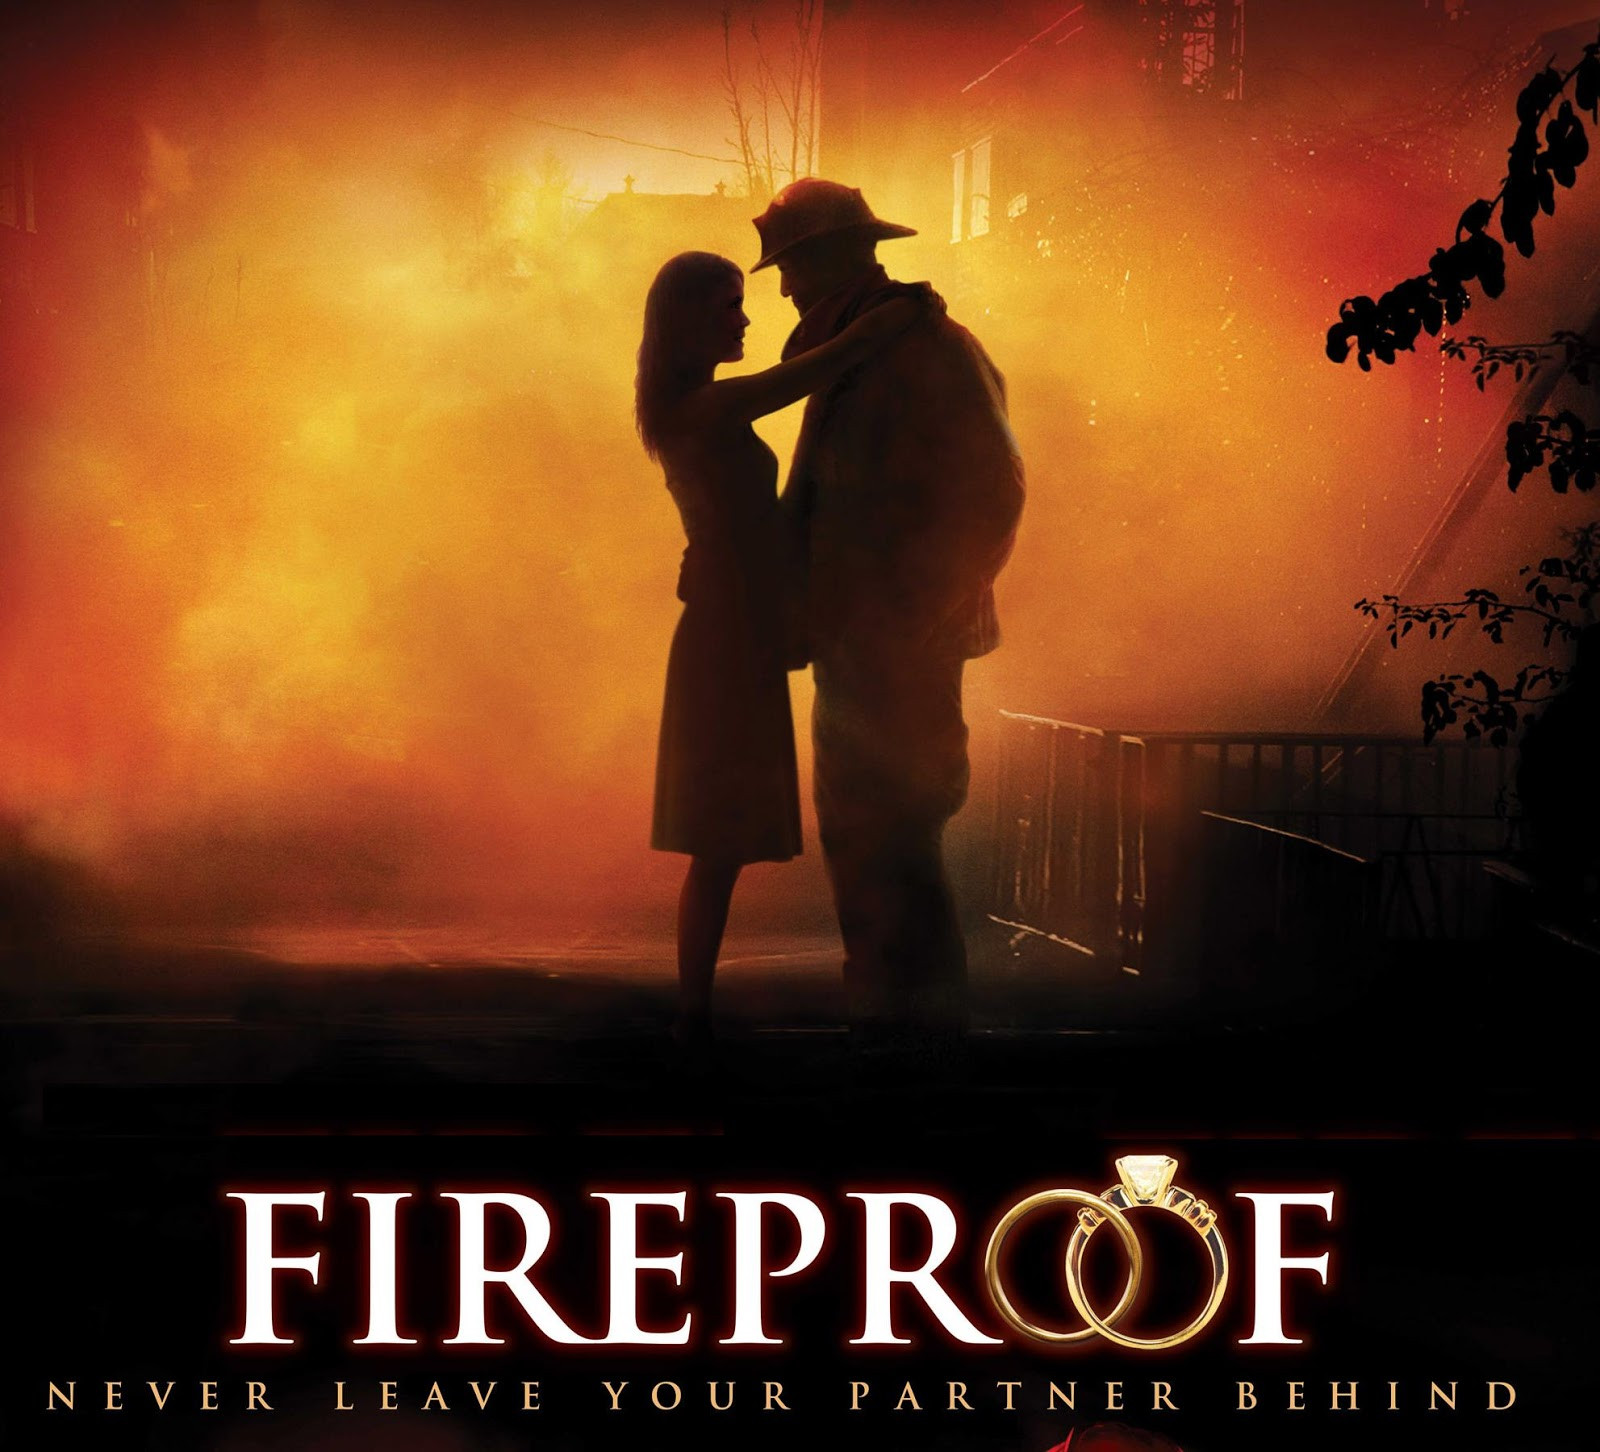 Movie Quotes About Love And Marriage
 Marriage Quotes Fireproof Movie QuotesGram